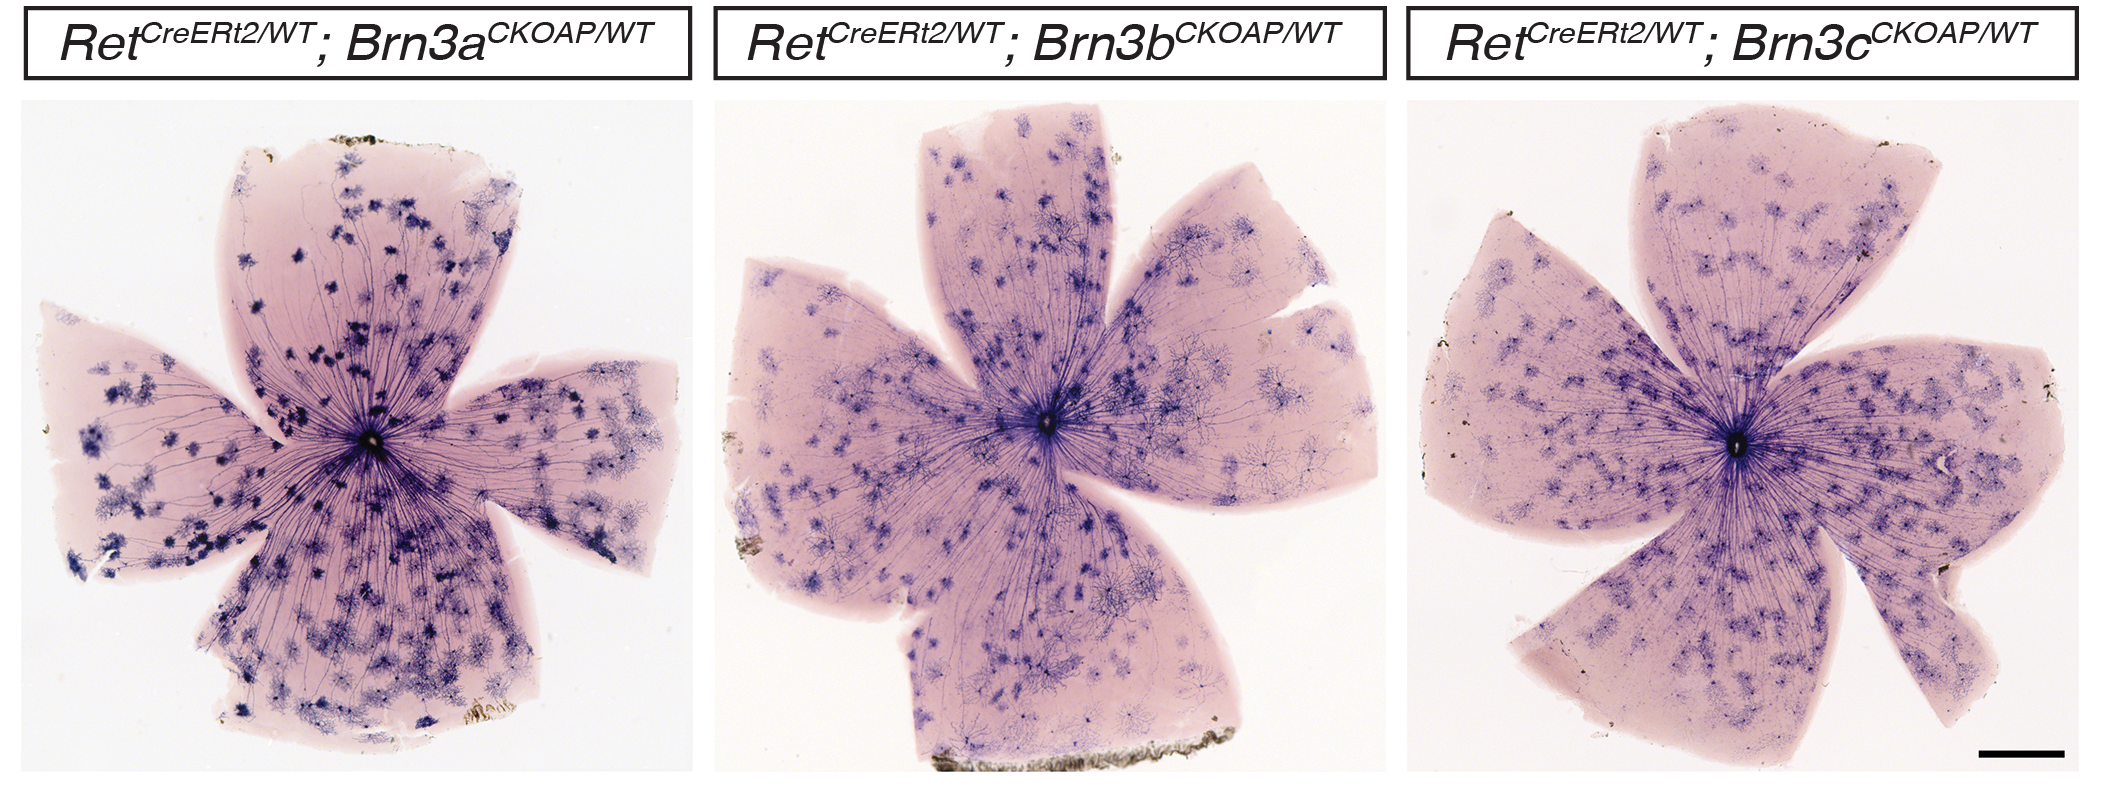 RGC types expressing cRet in combination with Brn3 transcription factors